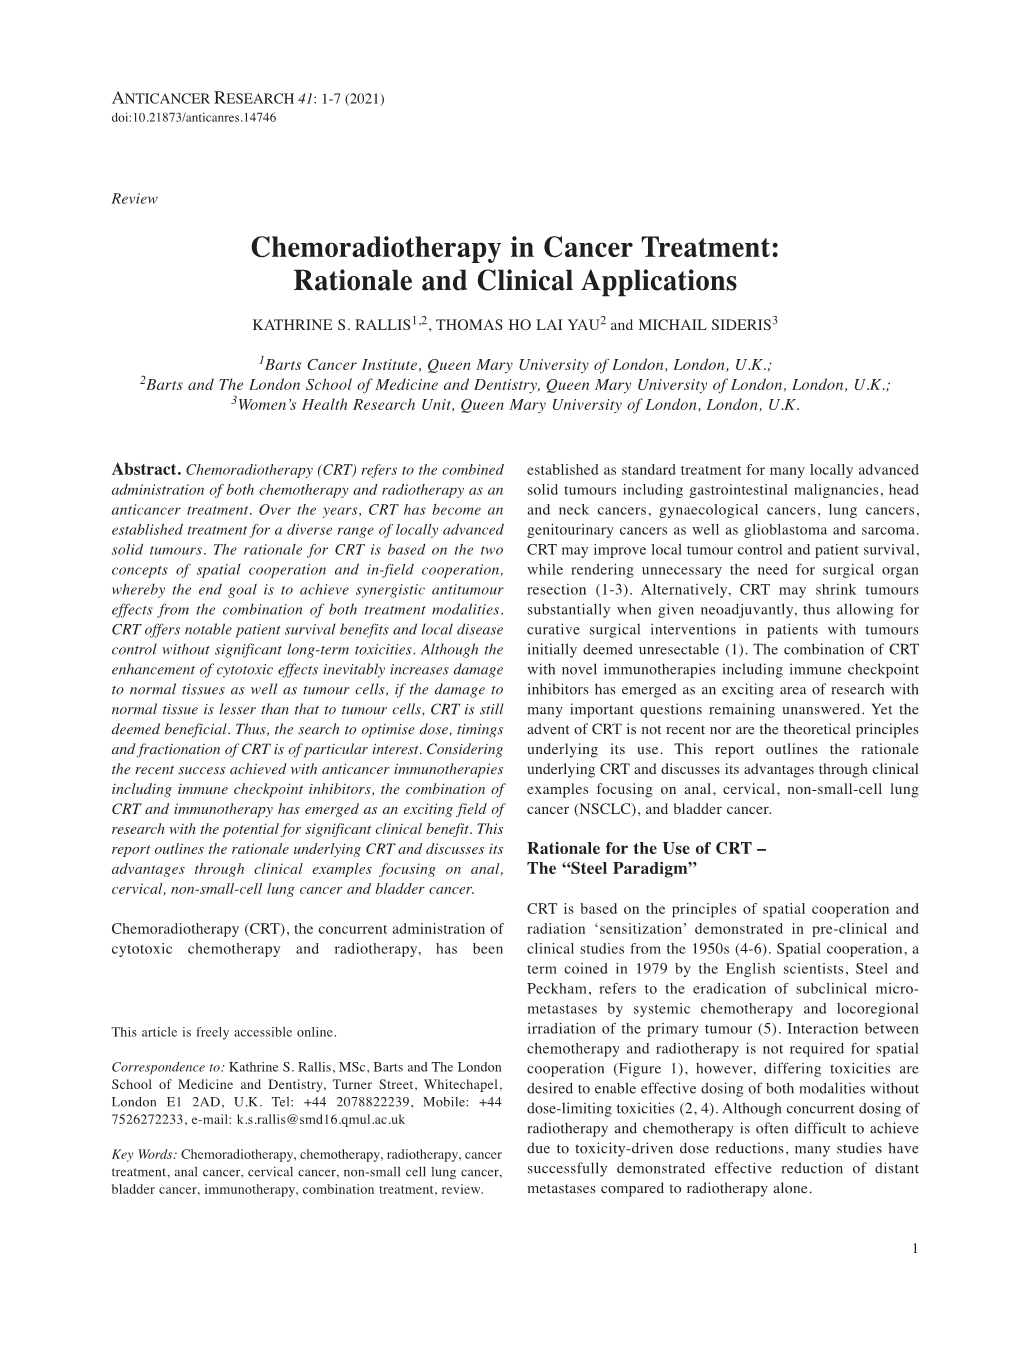 Chemoradiotherapy in Cancer Treatment: Rationale and Clinical Applications KATHRINE S